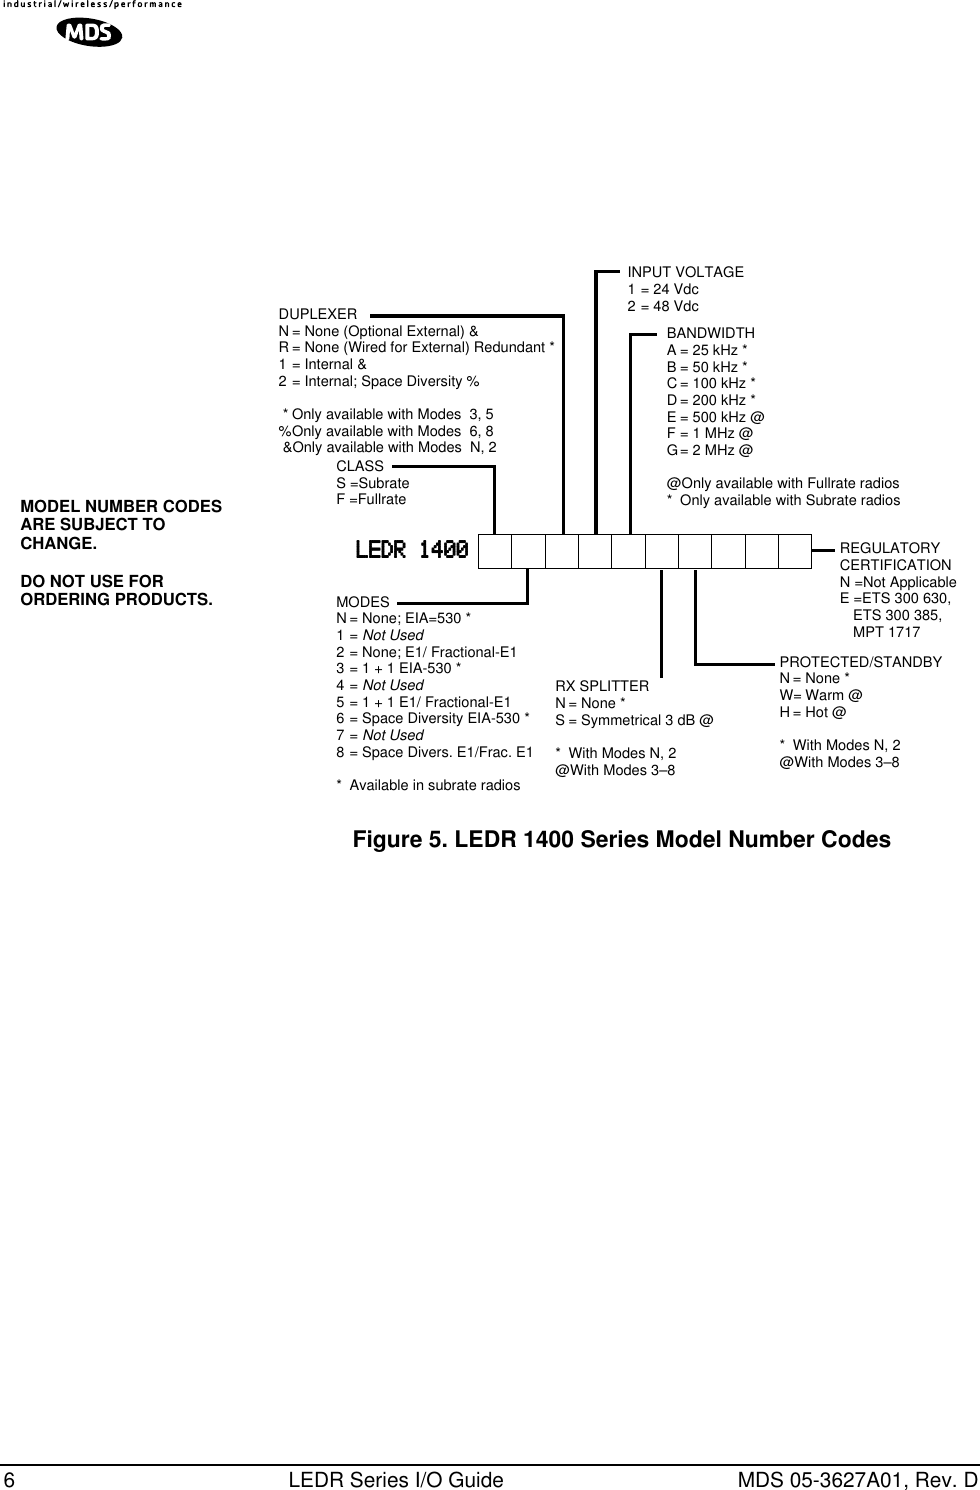  6 LEDR Series I/O Guide MDS 05-3627A01, Rev. D Invisible place holder Figure 5. LEDR 1400 Series Model Number CodesMODEL NUMBER CODES ARE SUBJECT TO CHANGE.DO NOT USE FOR ORDERING PRODUCTS.DUPLEXERN = None (Optional External) &amp;R = None (Wired for External) Redundant *1 = Internal &amp;2 = Internal; Space Diversity % * Only available with Modes  3, 5%Only available with Modes  6, 8 &amp;Only available with Modes  N, 2MODESN = None; EIA=530 *1=Not Used2 = None; E1/ Fractional-E13 = 1 + 1 EIA-530 *4=Not Used5 = 1 + 1 E1/ Fractional-E16 = Space Diversity EIA-530 *7= Not Used8 = Space Divers. E1/Frac. E1*  Available in subrate radiosCLASSS =SubrateF =FullrateBANDWIDTHA = 25 kHz *B = 50 kHz *C = 100 kHz *D = 200 kHz *E = 500 kHz @F = 1 MHz @G= 2 MHz @@Only available with Fullrate radios* Only available with Subrate radiosREGULATORY CERTIFICATIONN =Not ApplicableE =ETS 300 630,ETS 300 385,MPT 1717RX SPLITTERN = None *S = Symmetrical 3 dB @* With Modes N, 2@With Modes 3–8INPUT VOLTAGE1 = 24 Vdc2 = 48 VdcLLLLEEEEDDDDRRRR    1111444400000000PROTECTED/STANDBYN = None *W= Warm @H = Hot @* With Modes N, 2@With Modes 3–8